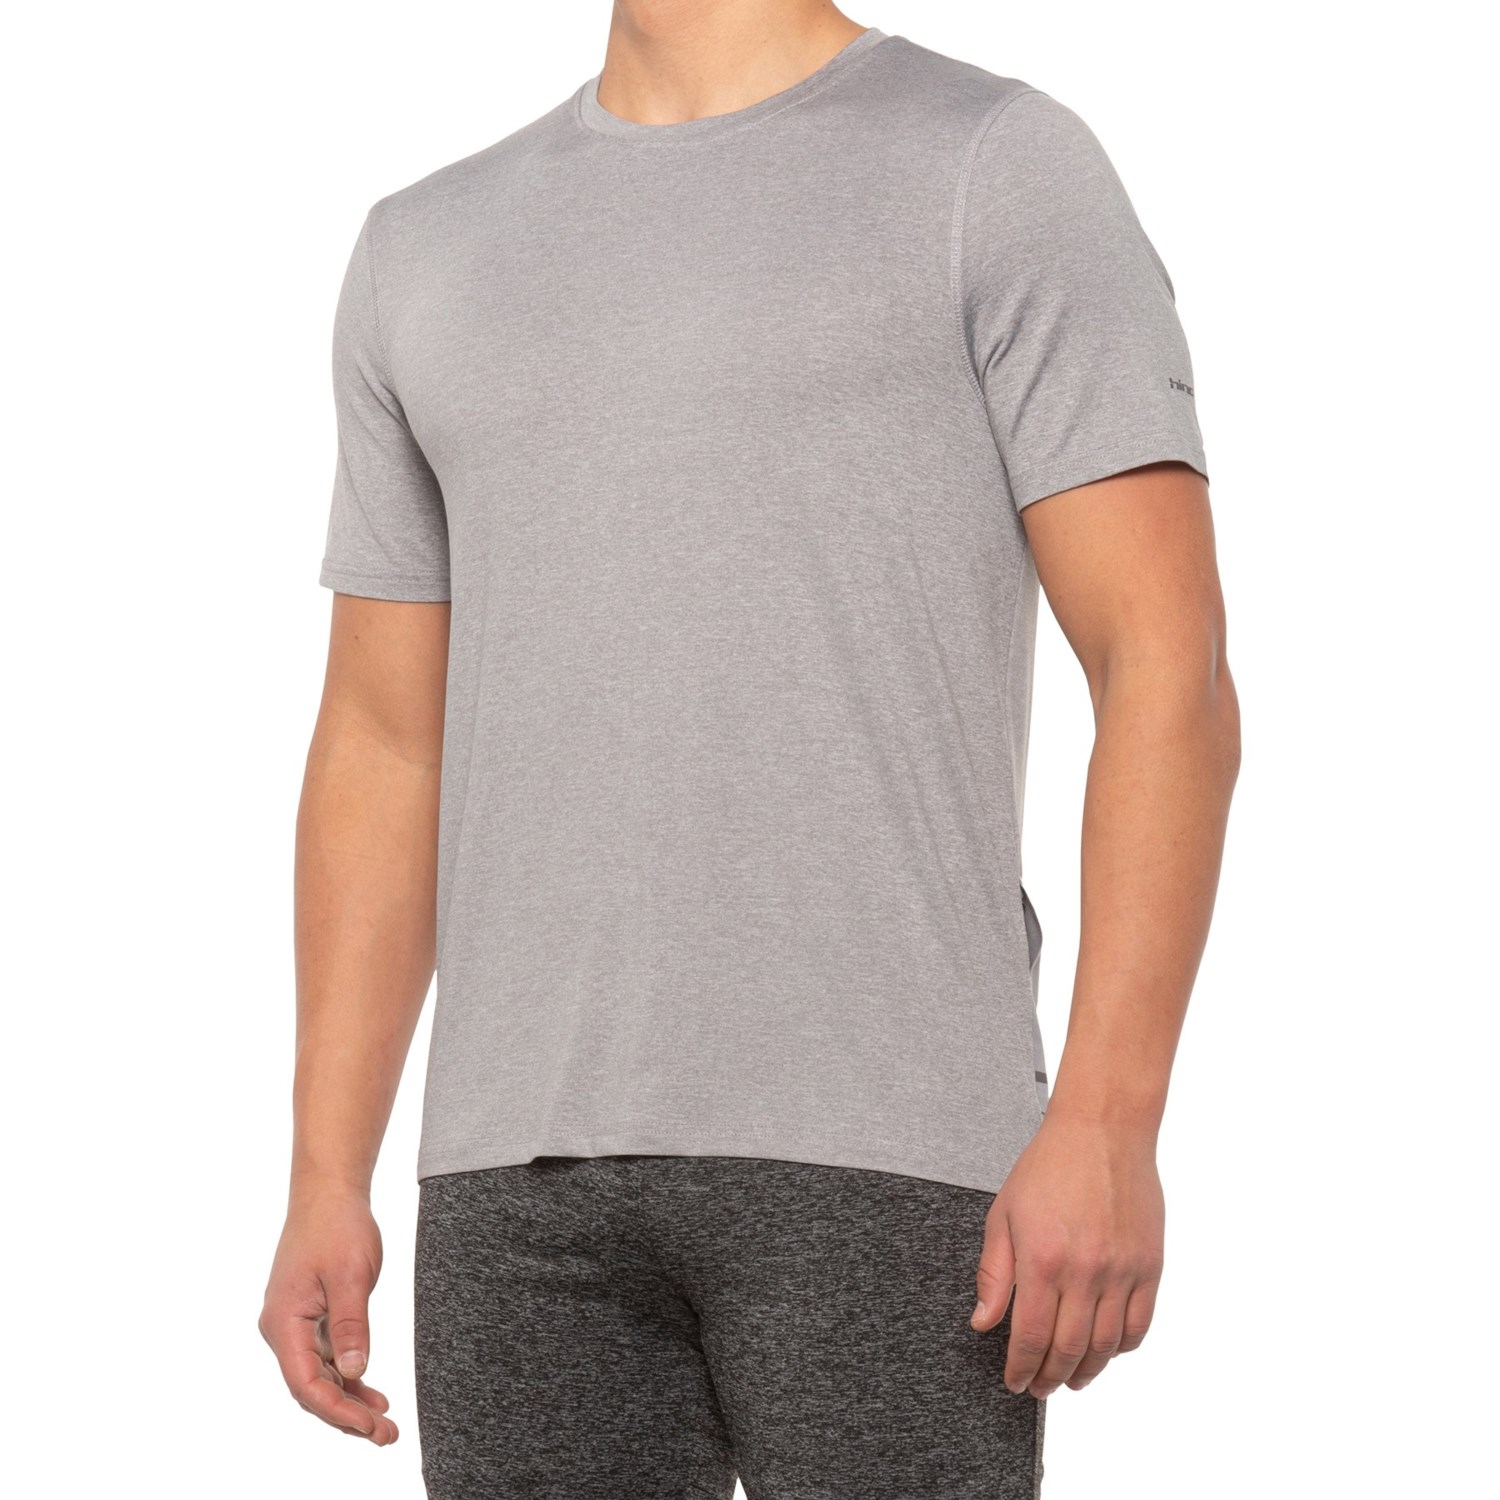 Hind Stretch-Woven Pocket T-Shirt (For Men) - Save 50%